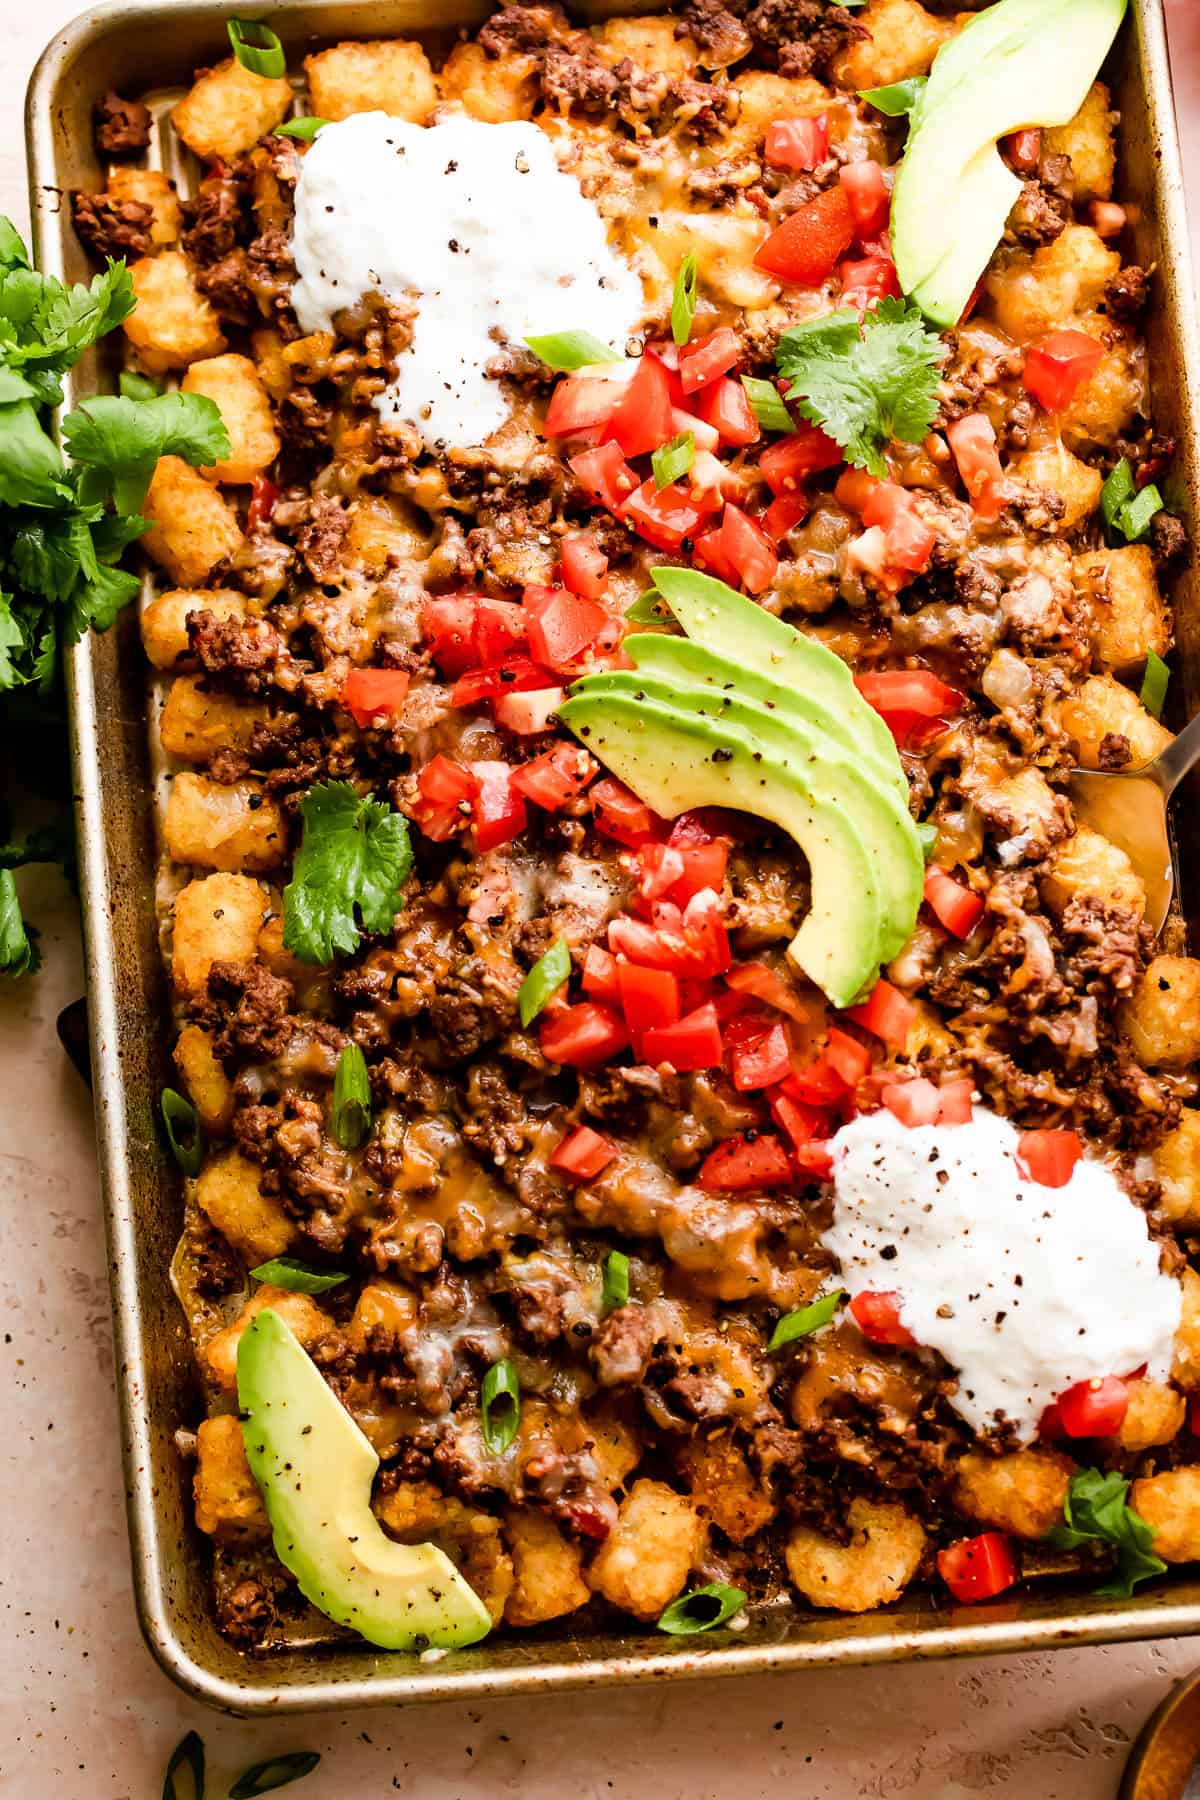 Totchos and other Loaded Tots Recipes - Easy Sheet Pan Totchos with Beef